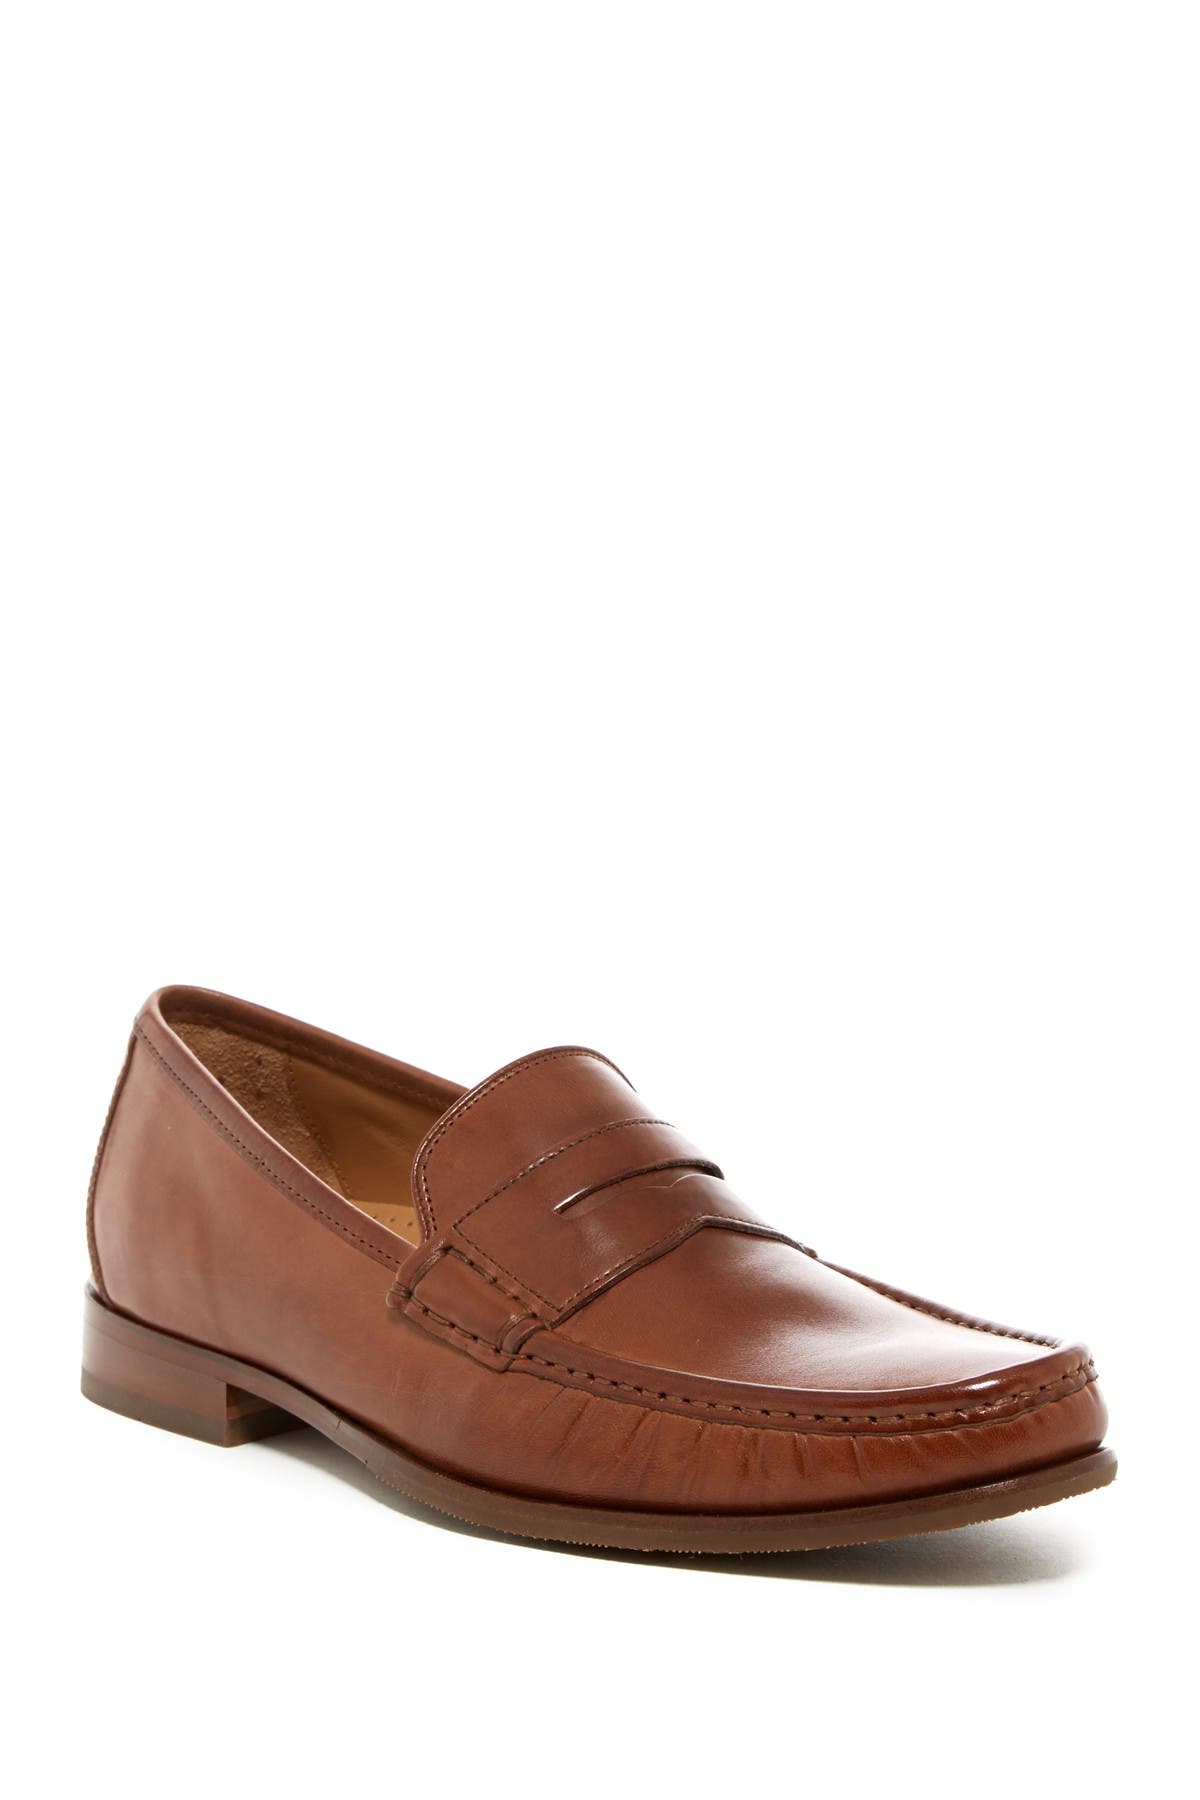 Cole Haan | Aiden Grand II Penny Loafer 